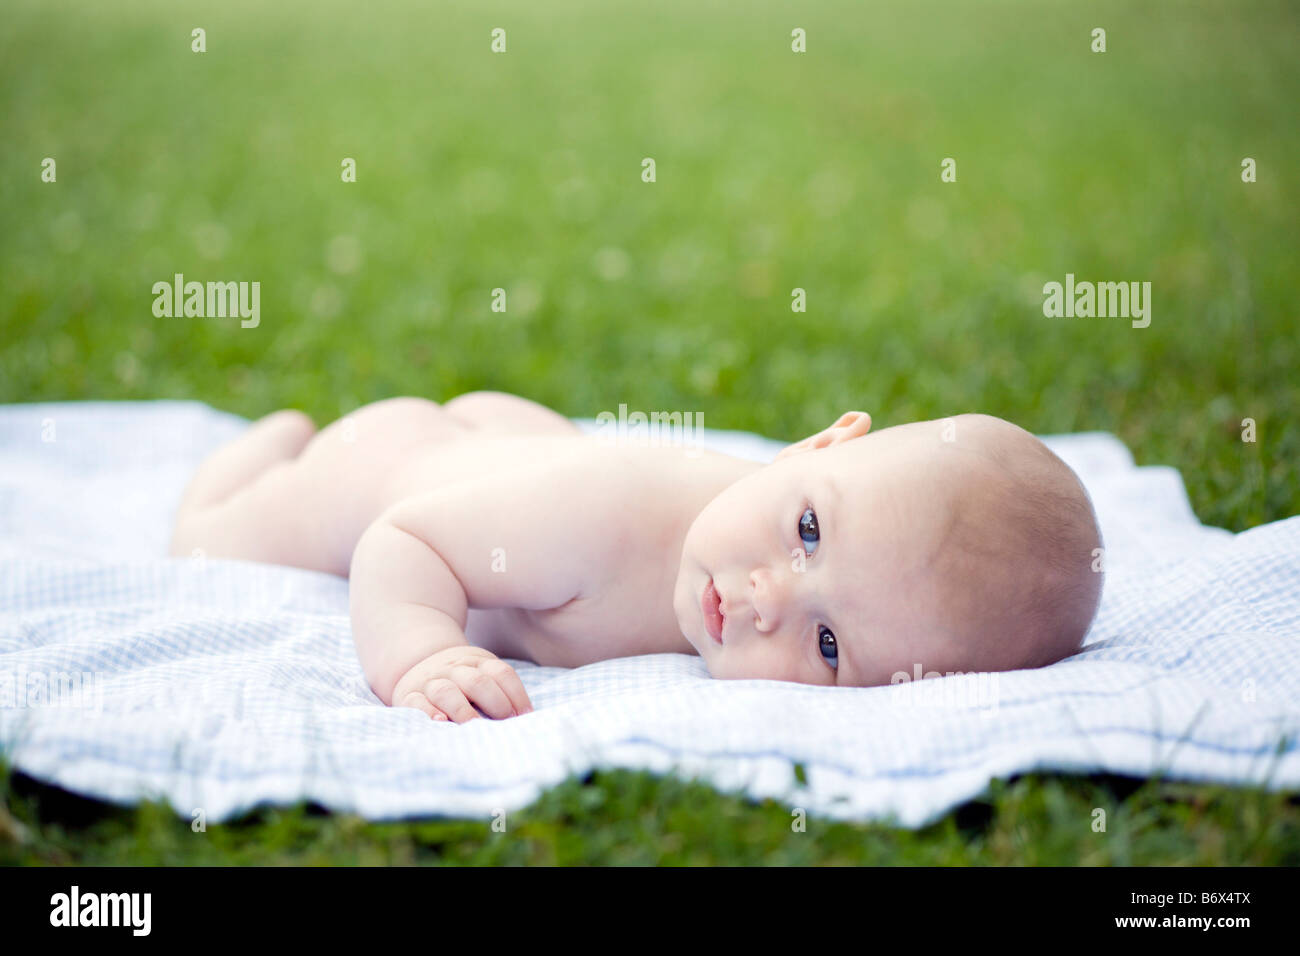 a baby laying alone on a blanket in a park Stock Photo